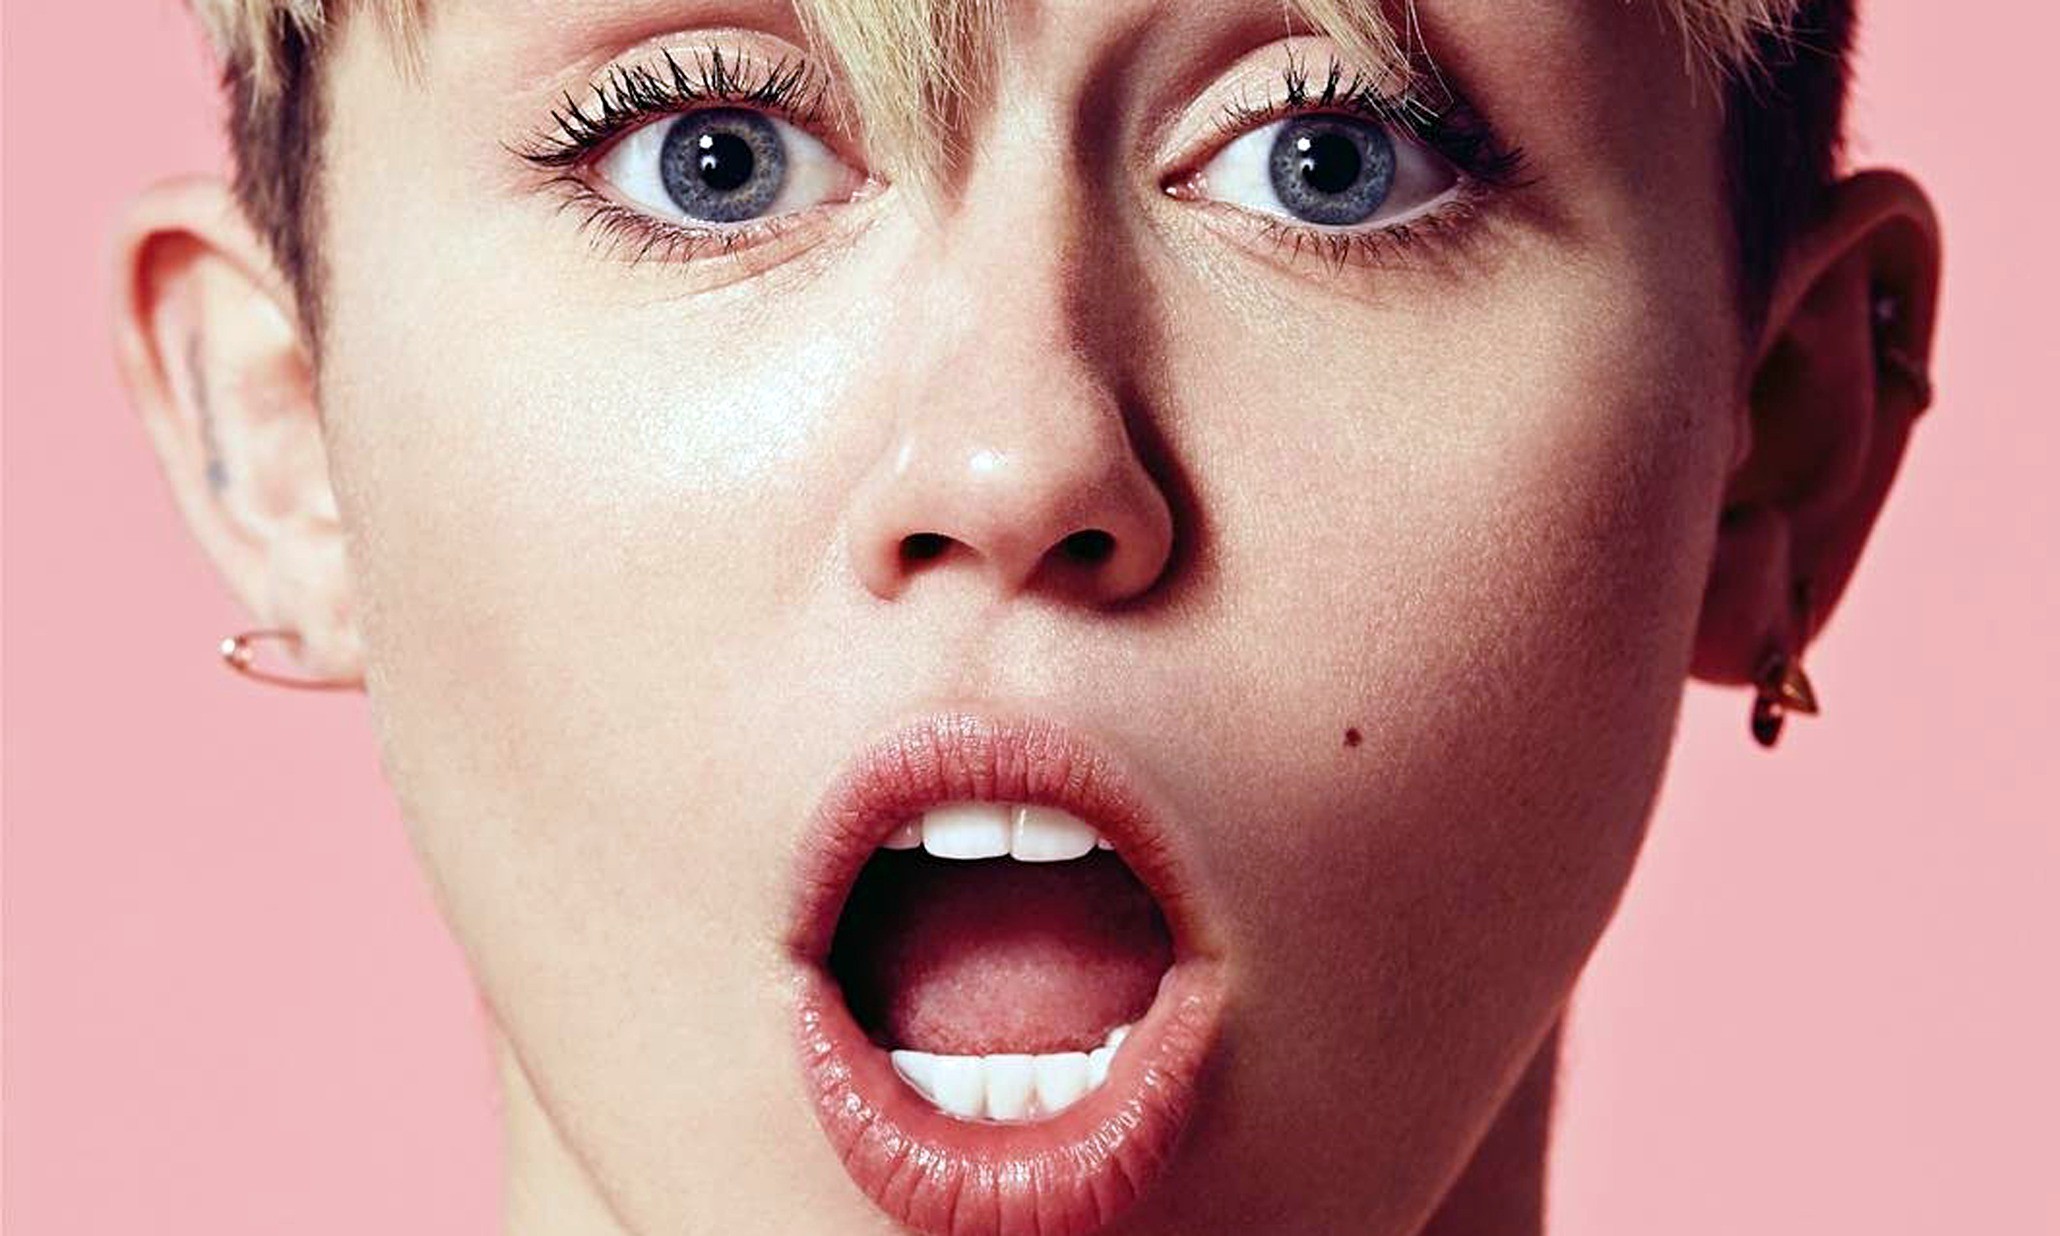 2060x1236 Miley Cyrus face - Download Hd Miley Cyrus face wallpaper for desktop and  mobile device. Best wide Miley Cyrus facefree background images.